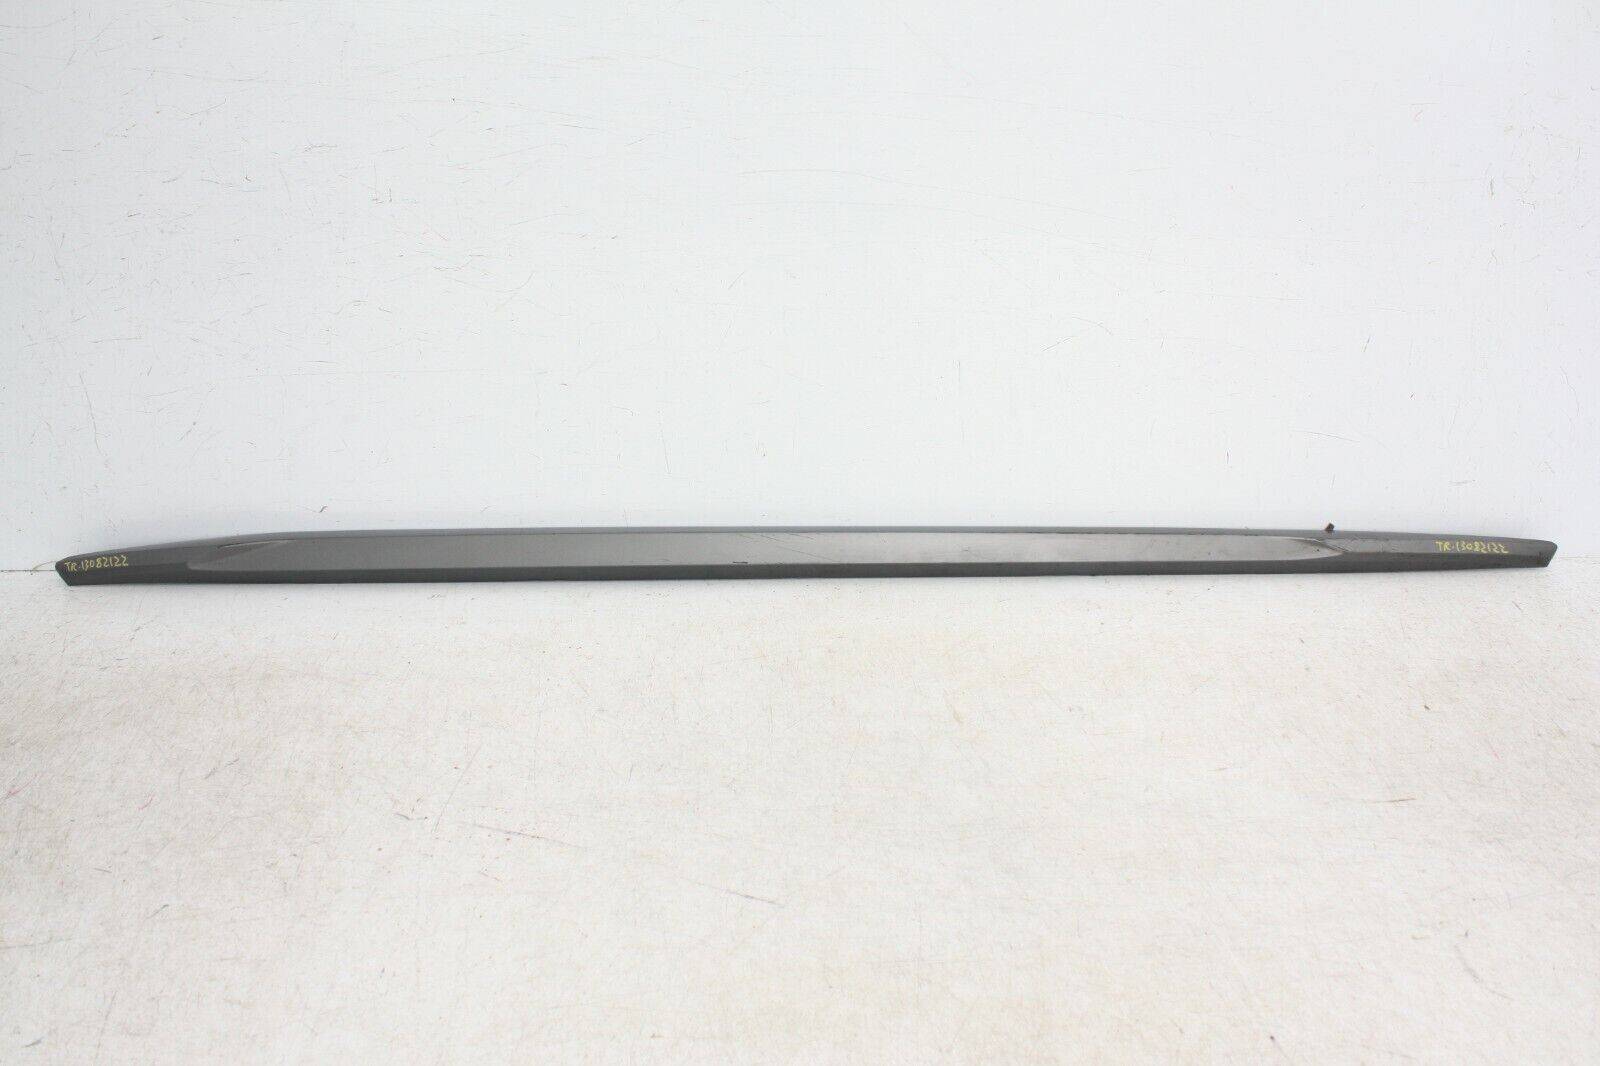 Audi-A3-Right-Side-Skirt-Genuine-175367544665